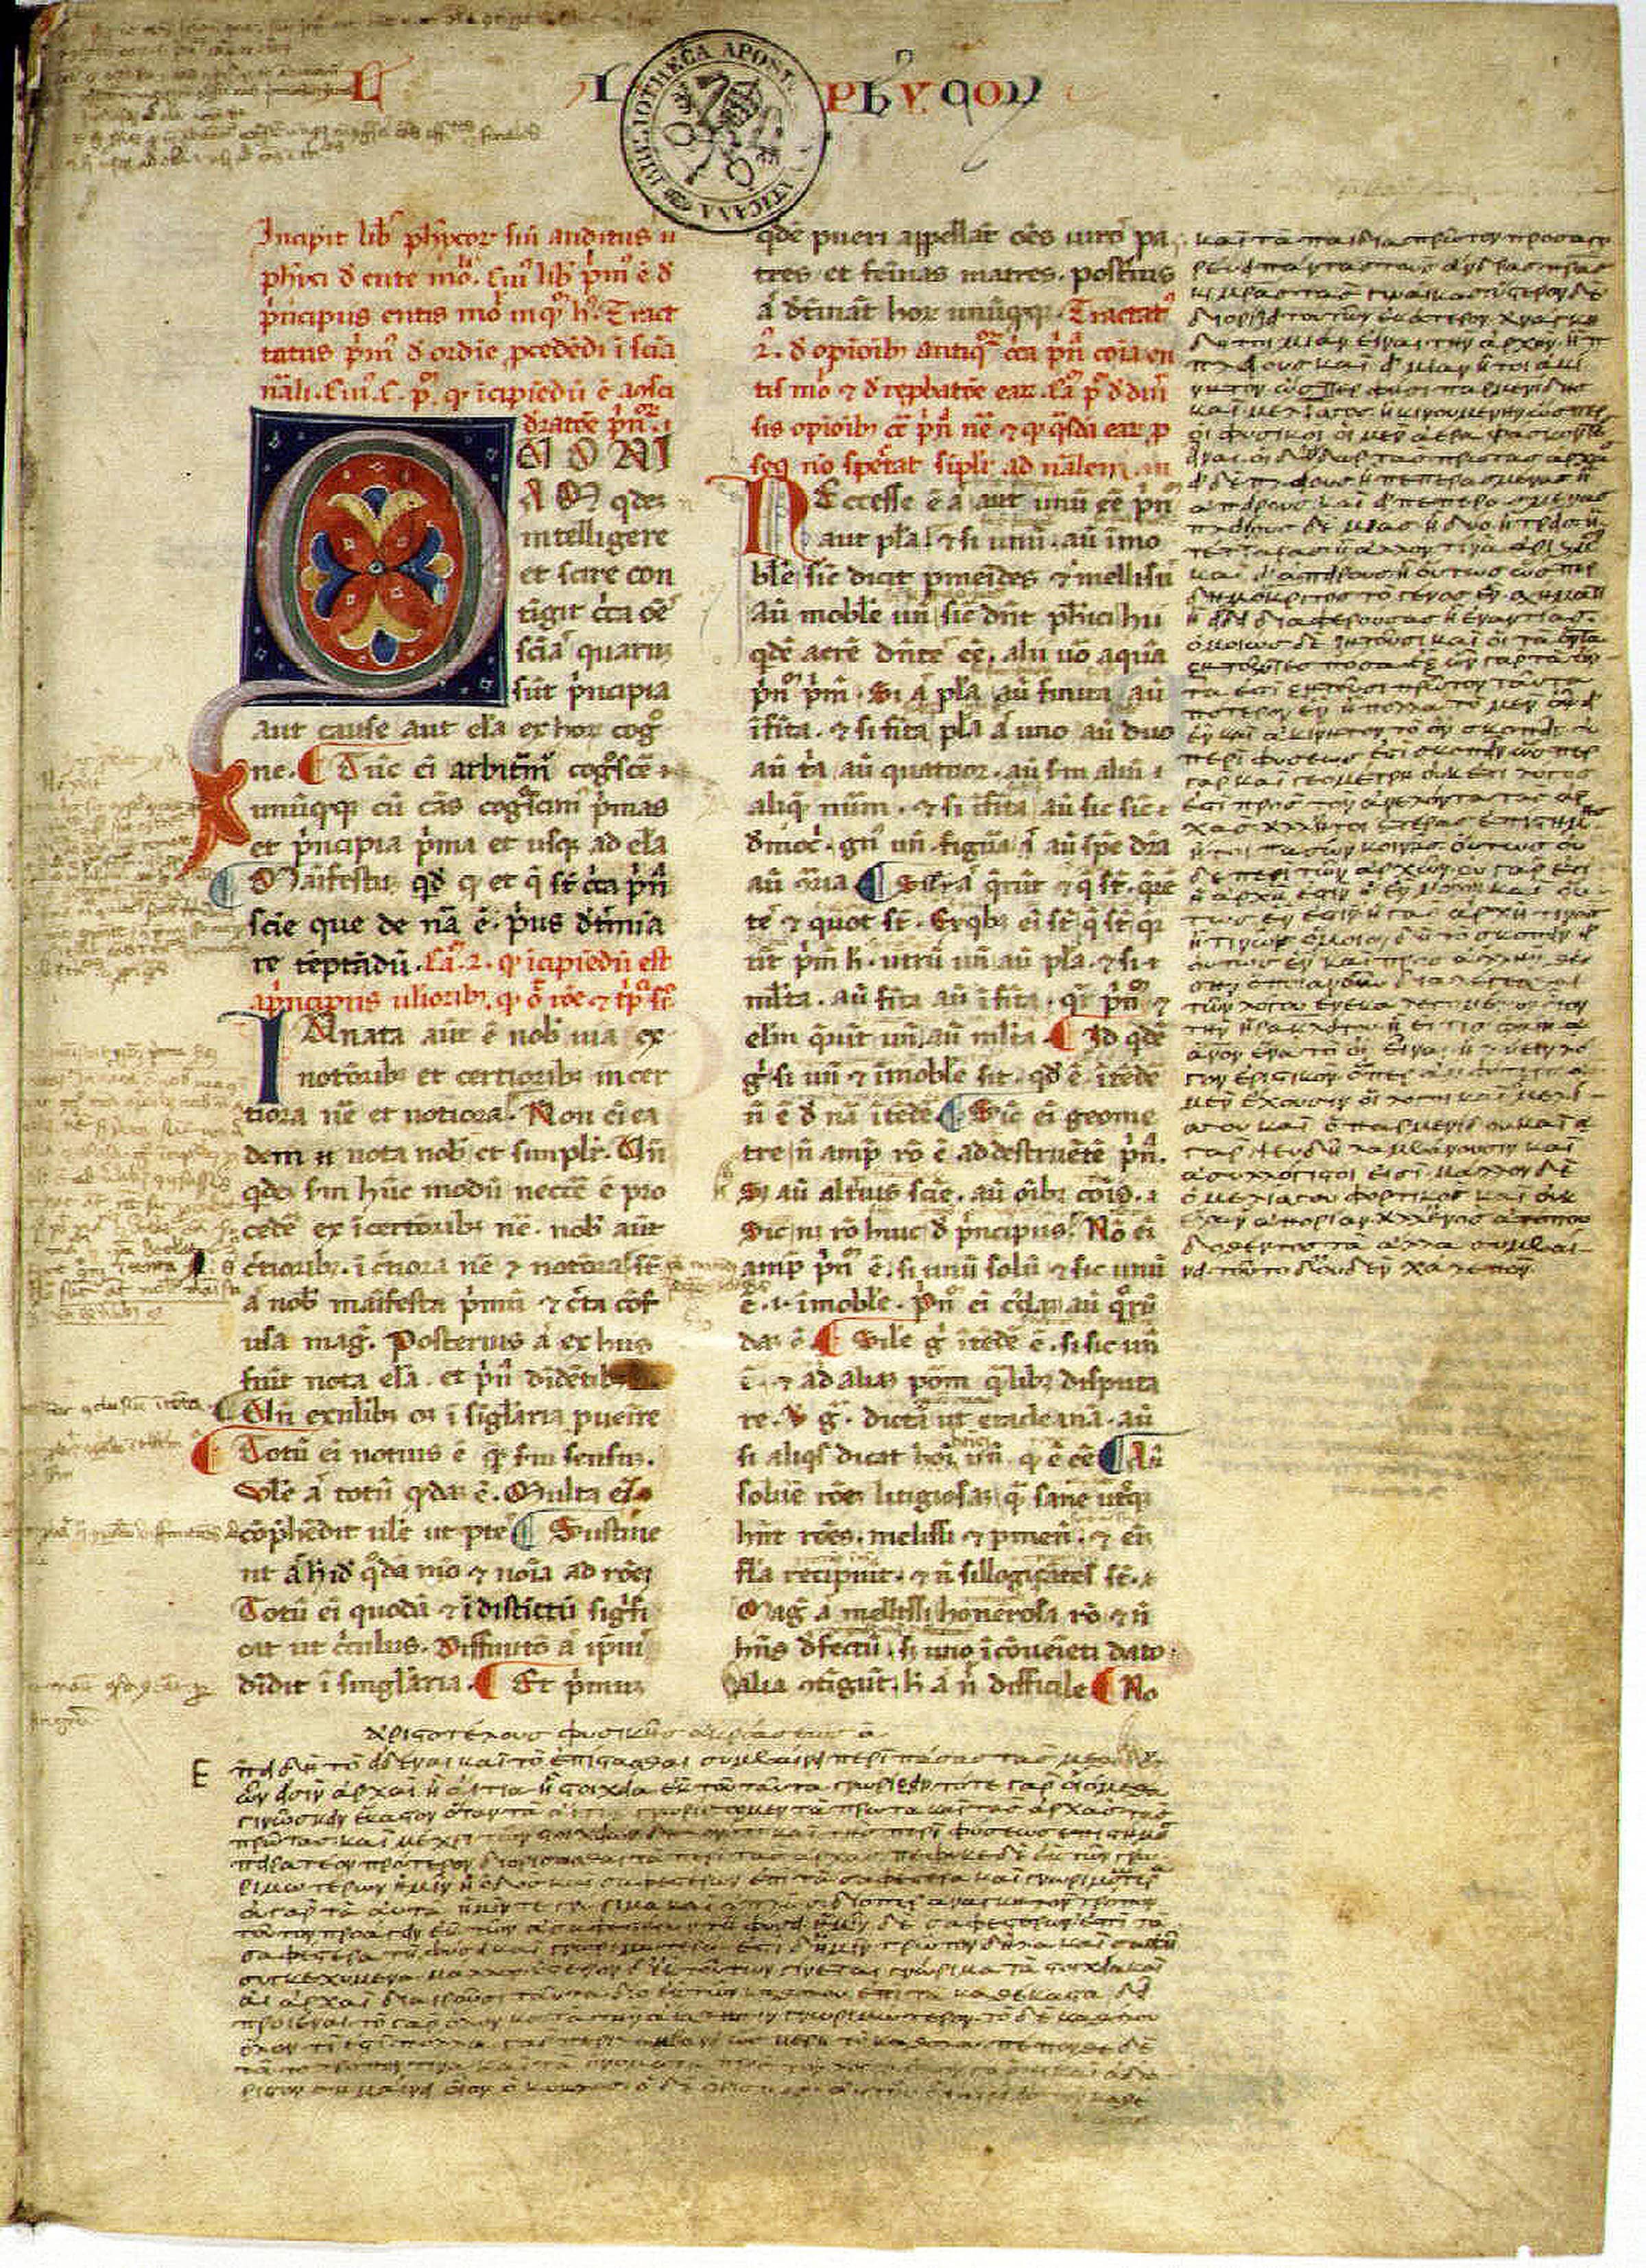 The beginning of Physics (Aristotle). Medieval Latin manuscript with the original Greek text added in the margins